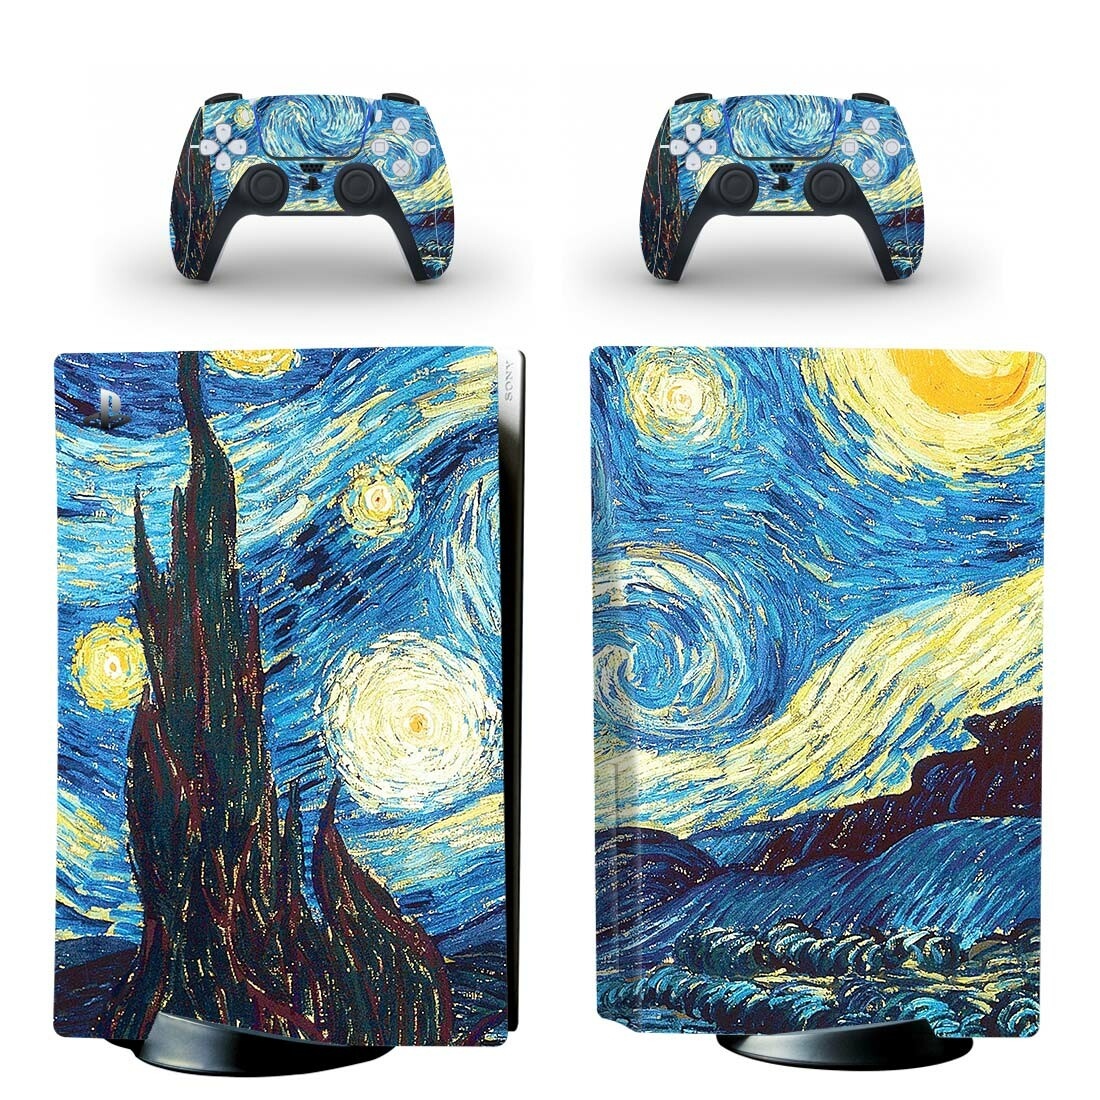 Painting Art PS5 Standard Disc Edition Skin Sticker Decal Cover for PlayStation 5 Console Controllers PS5 Skin Sticker Vinyl